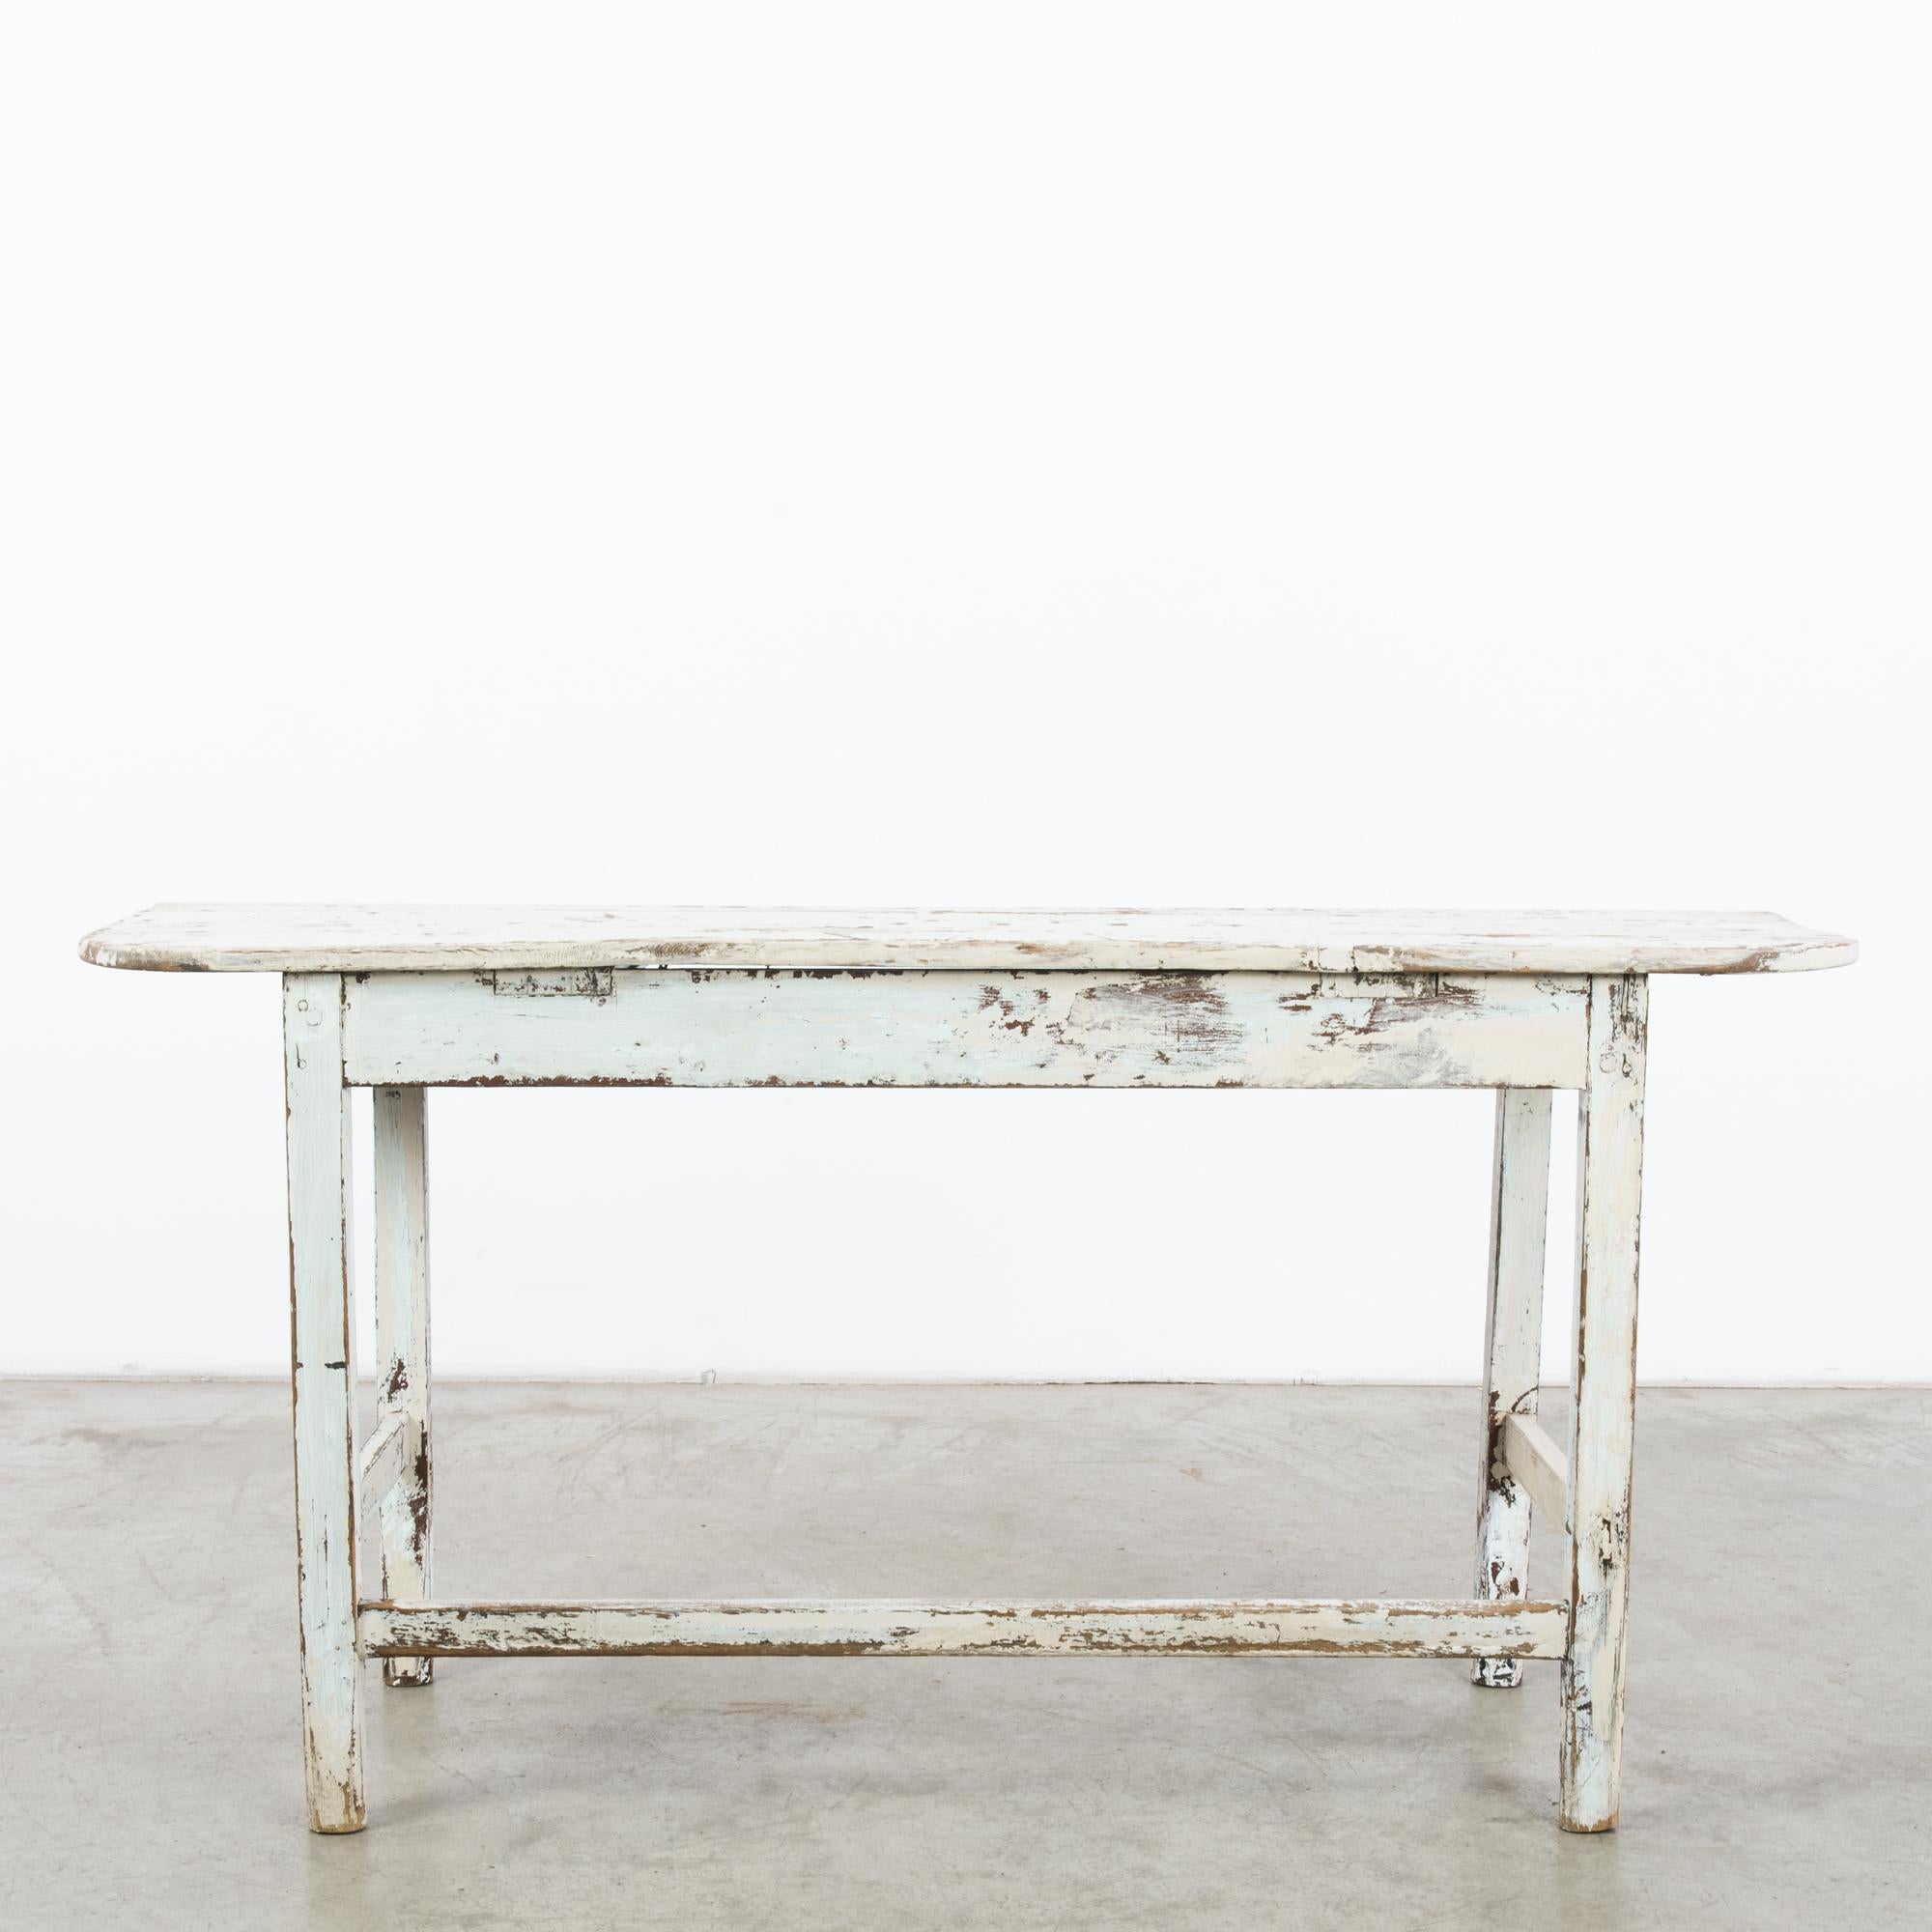 This wooden console table with rounded edges was made in France, circa 1880. Its simple construction features three stretchers and four angular posts with a slight taper toward the ground. Exquisitely weathered, the cream and soft sky blue patina